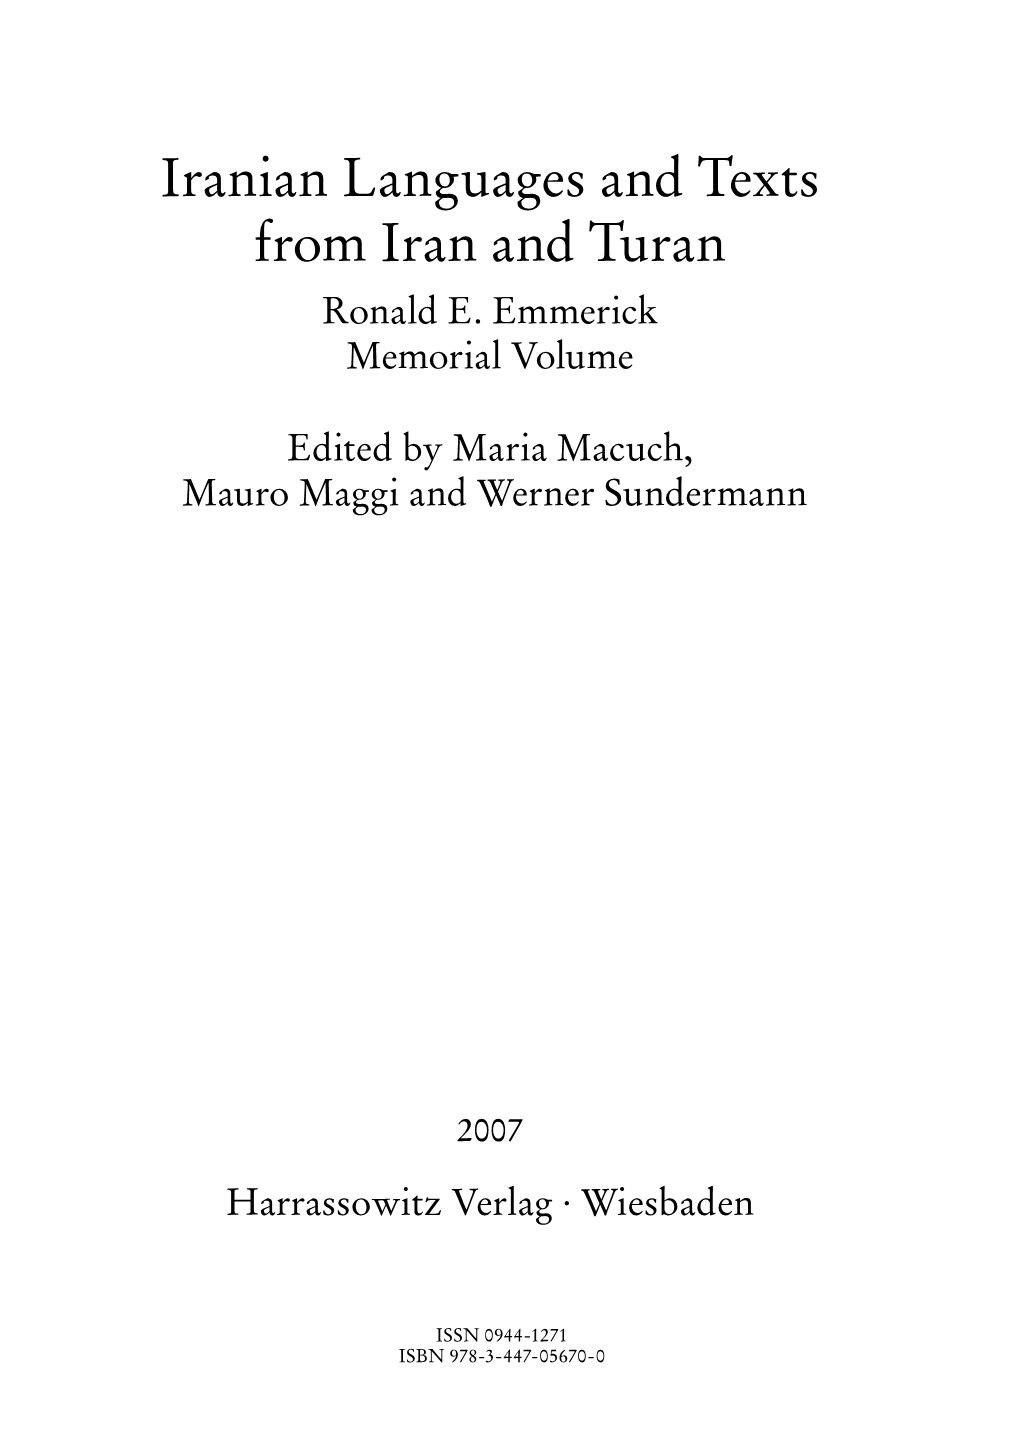 Iranian Languages and Texts from Iran and Turan Ronald E